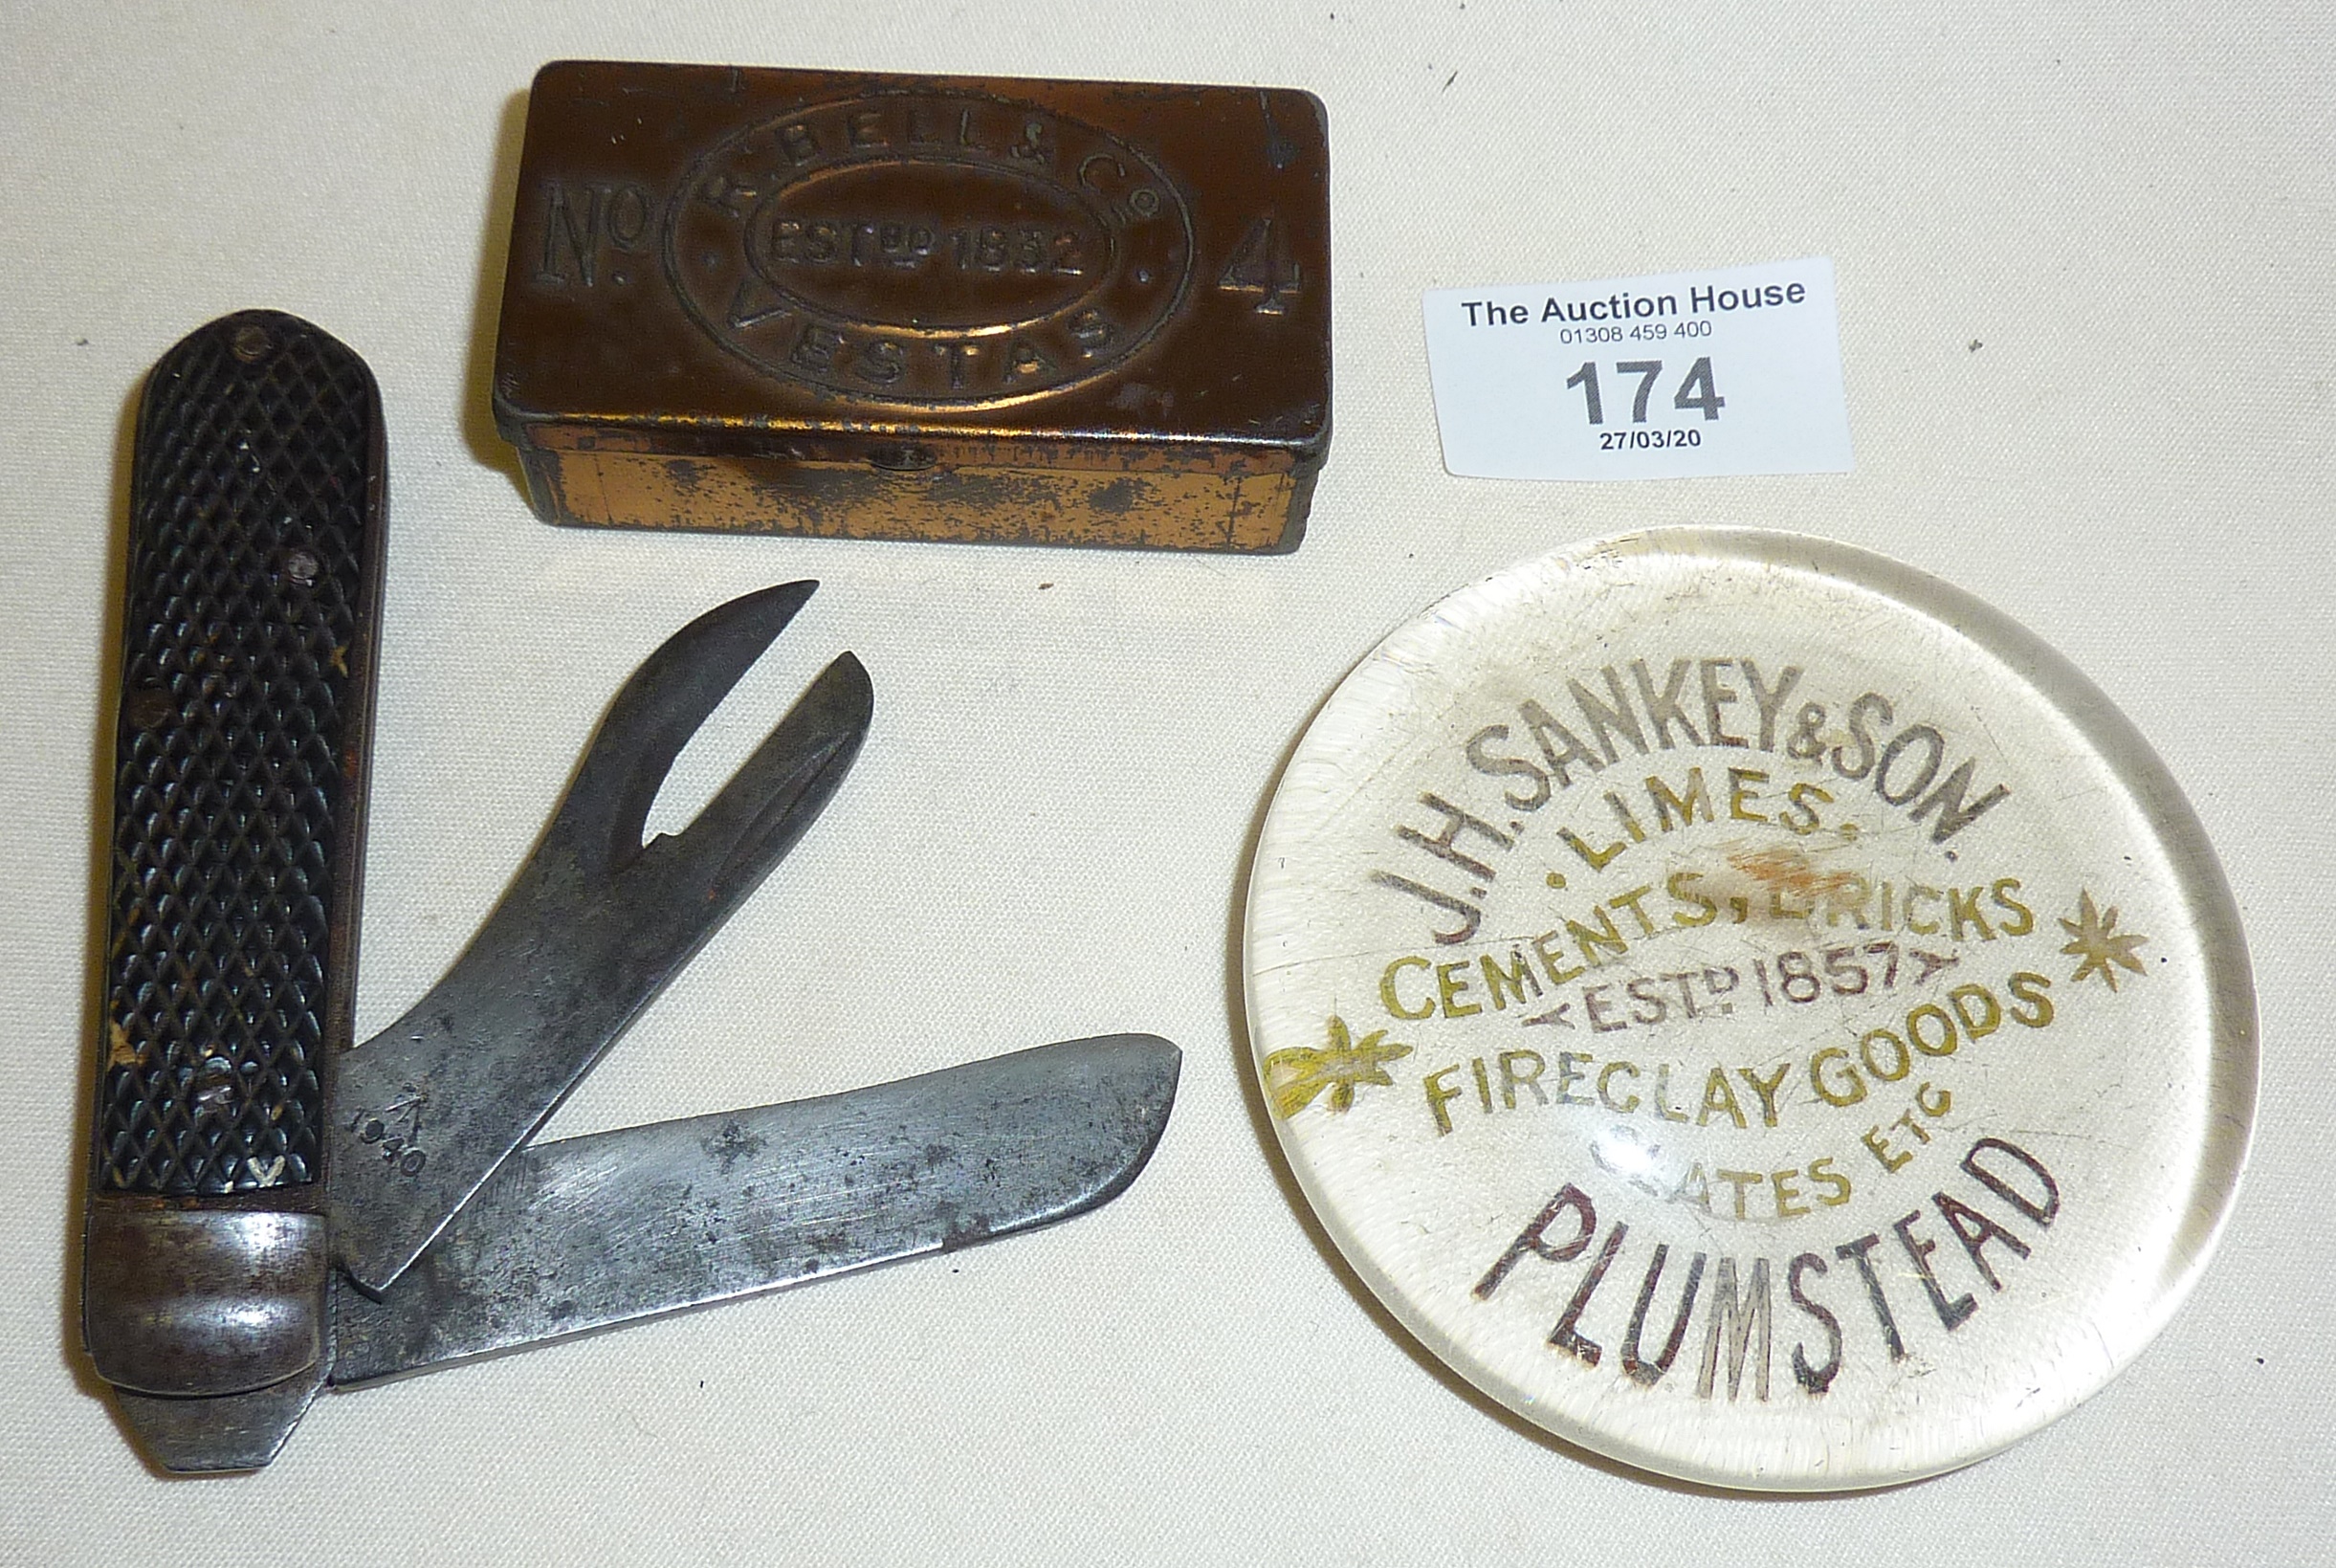 WW2 pocket knife marked with military arrow - "1940", R. Bell & Co. Vestas tin, and a Sankey & Son - Image 3 of 4